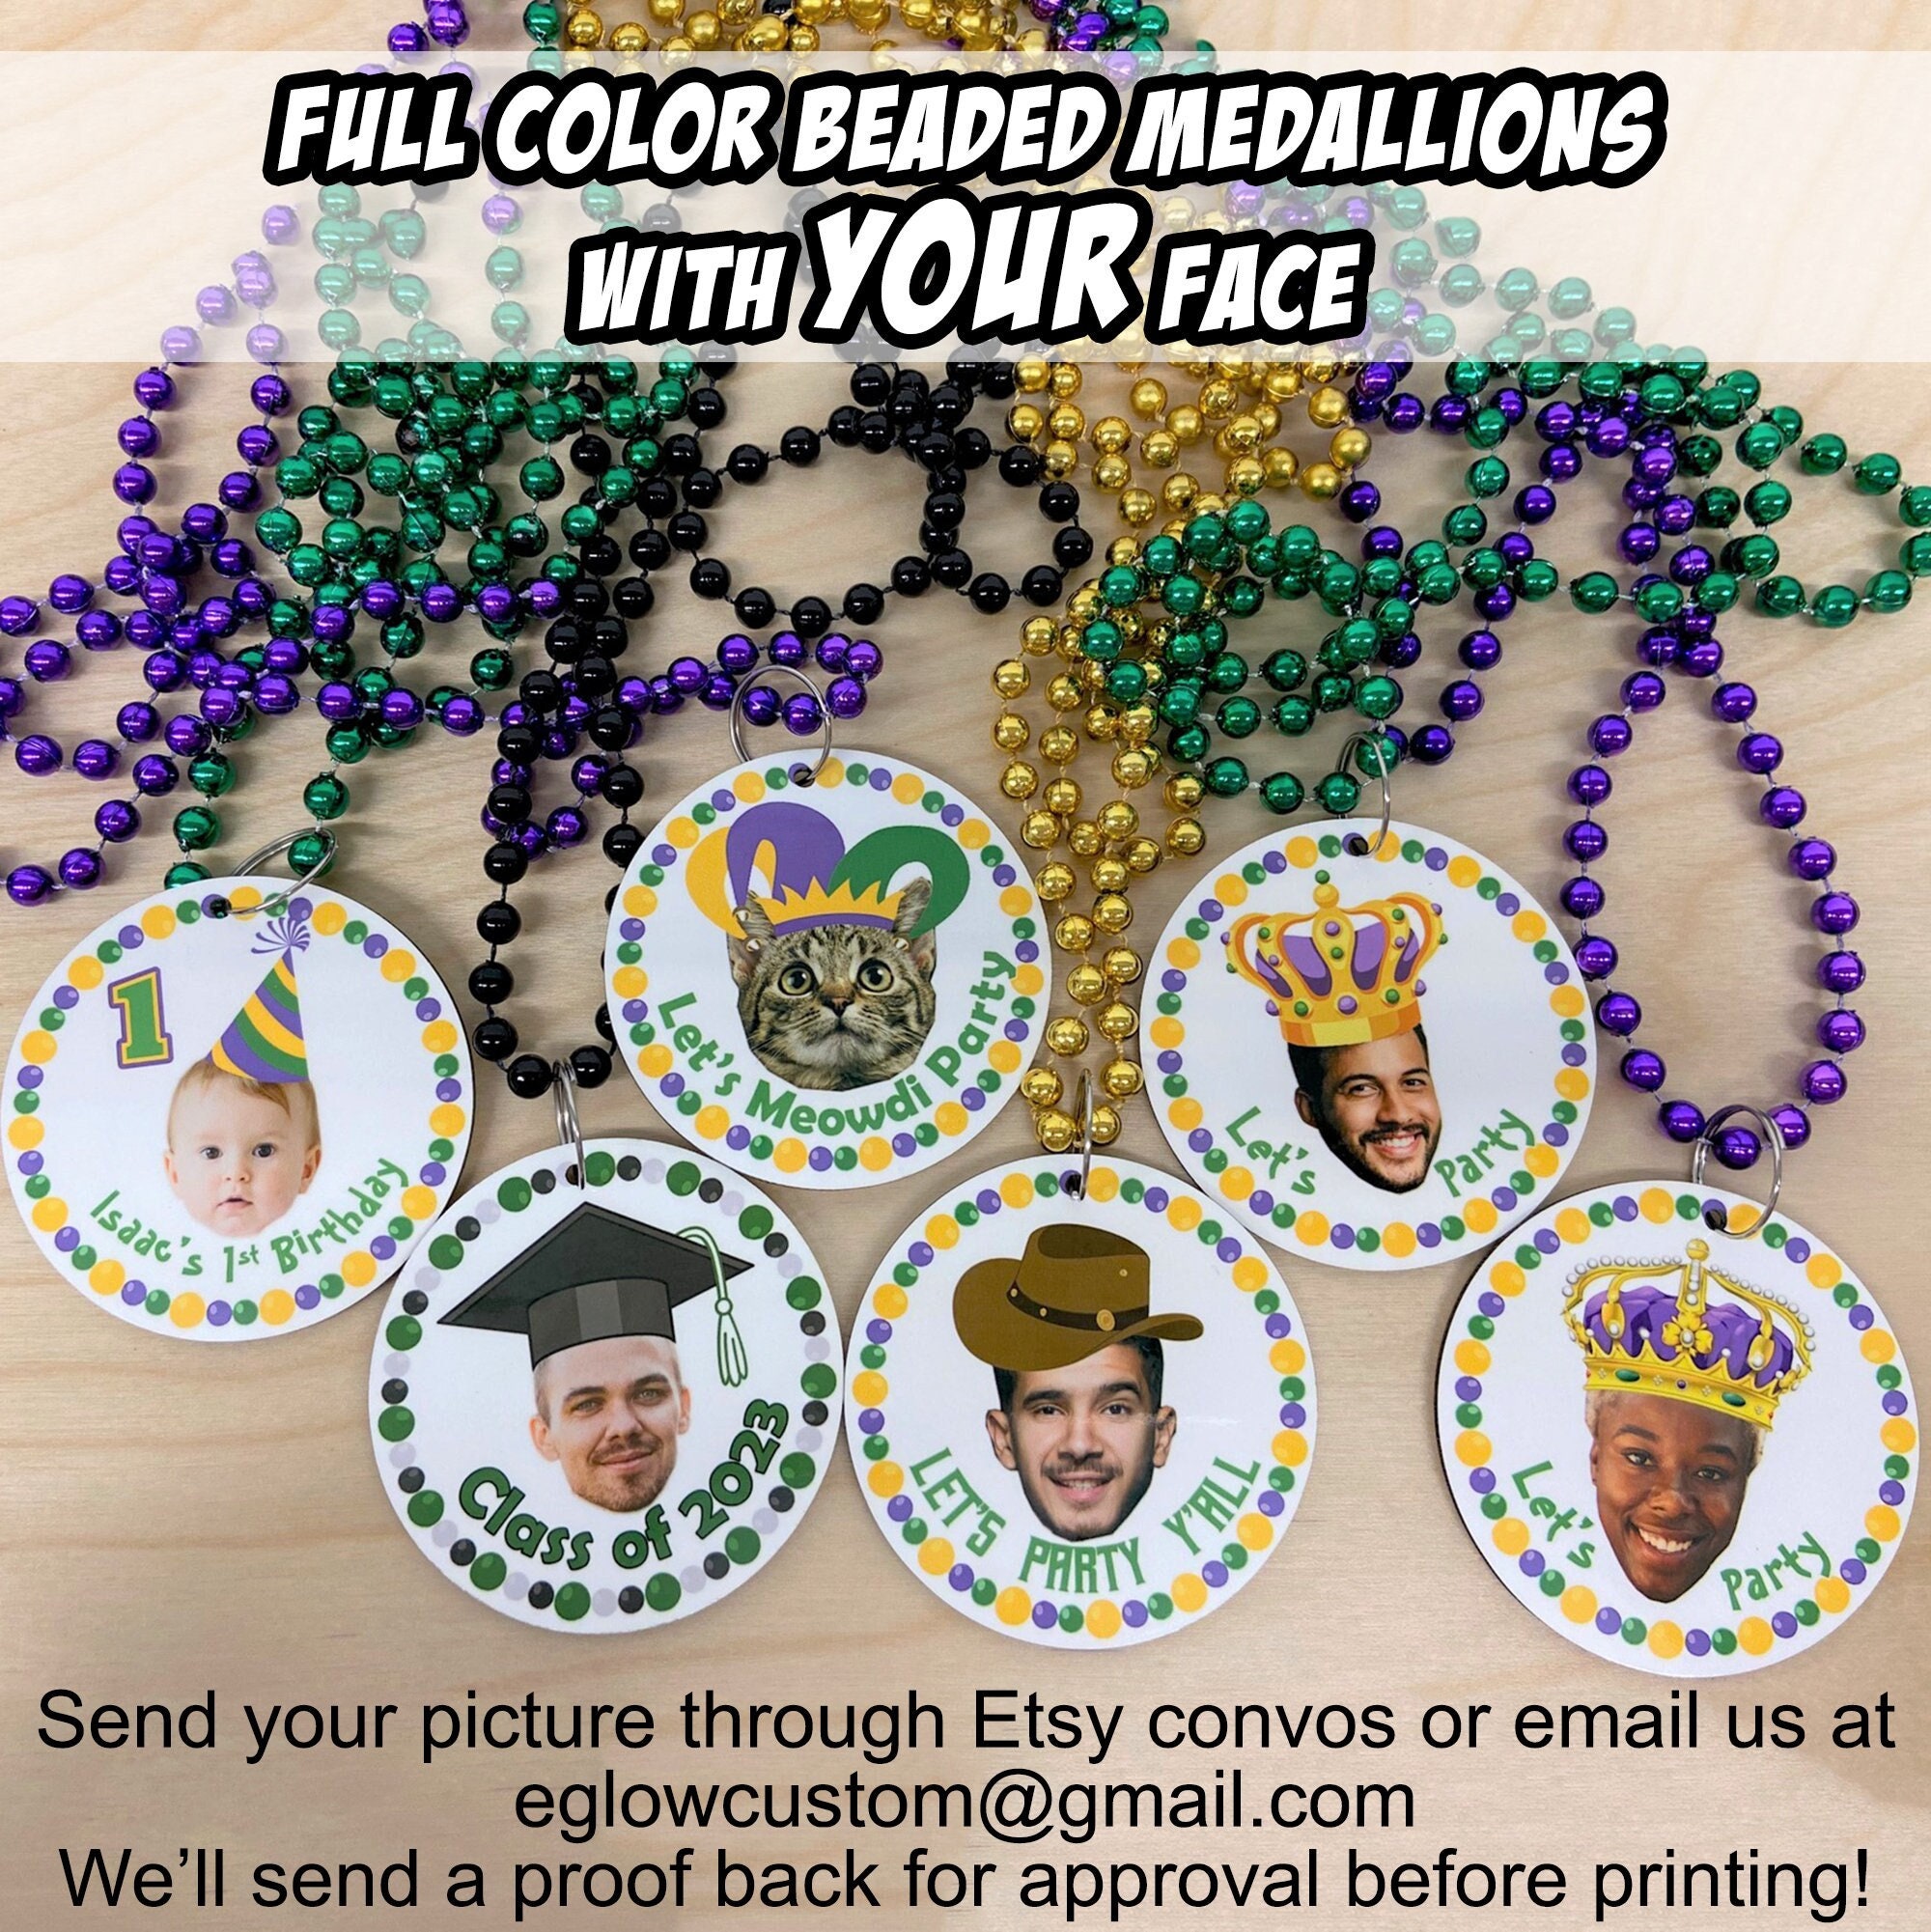 Purple, Green and Gold Mardi Gras Appliques from Beads by the Dozen